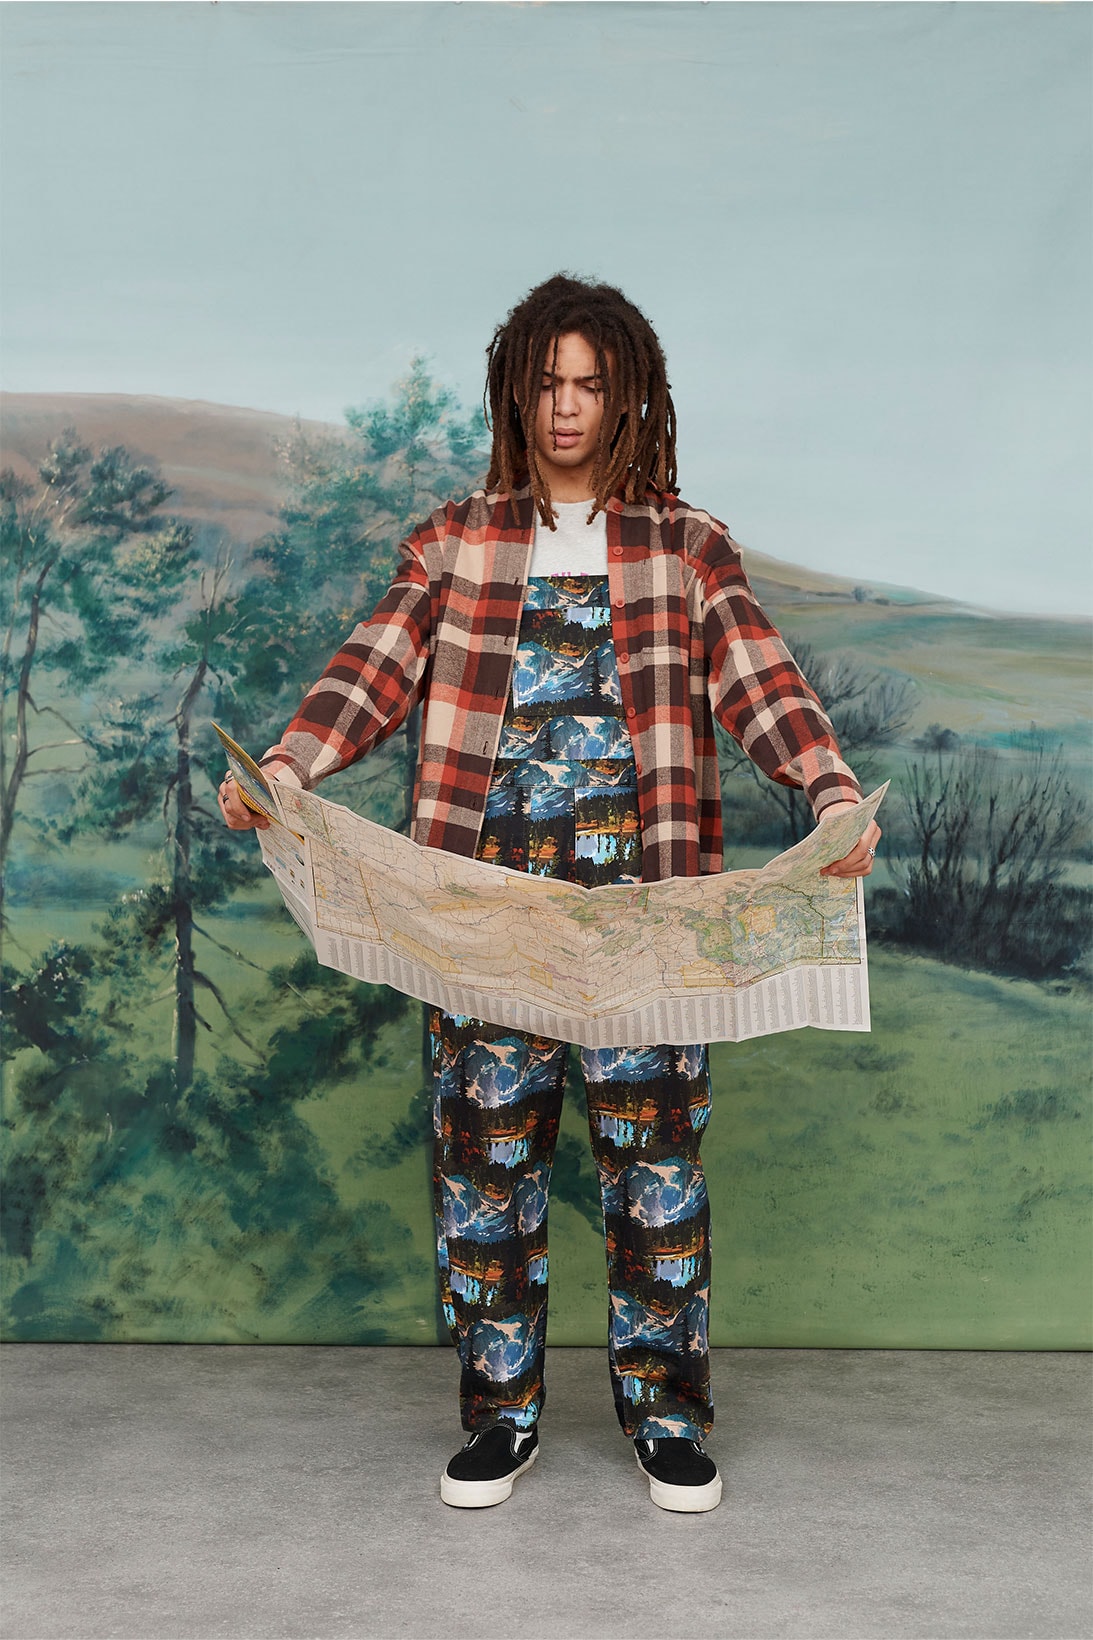 Lazy Oaf Take A Hike Outdoor Hiking Collection Lookbook Pattern Print Overalls Plaid Check Shirt